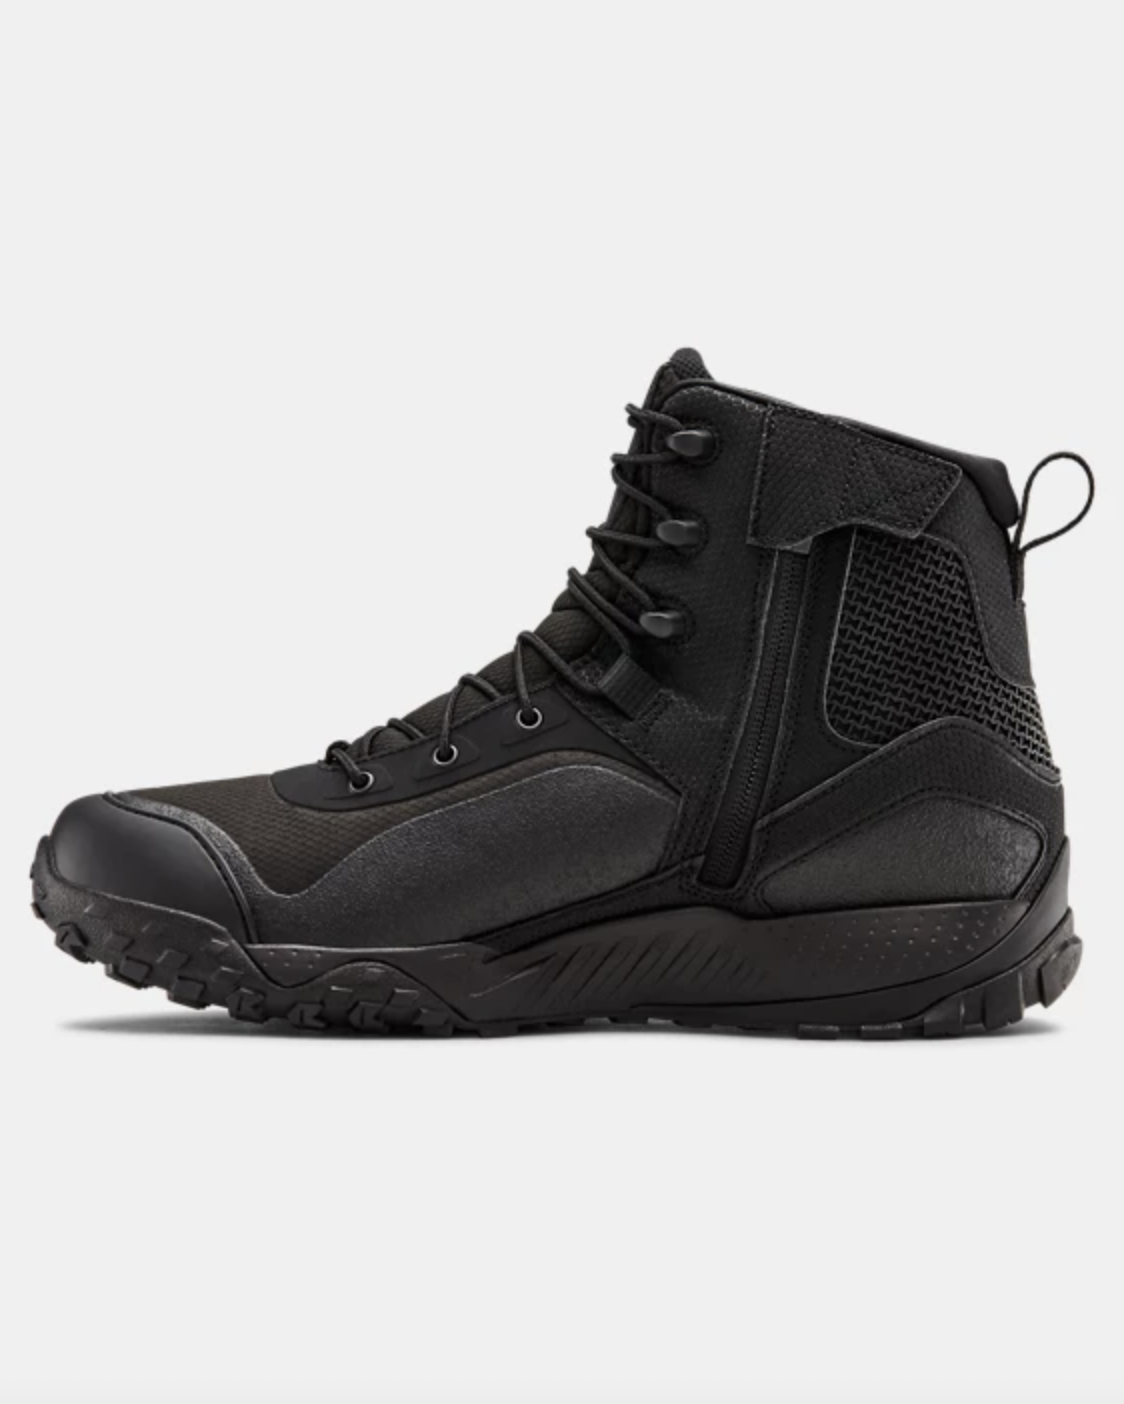 20 Best Work Boots for Men 2021 - Comfortable, Stylish Work Boots